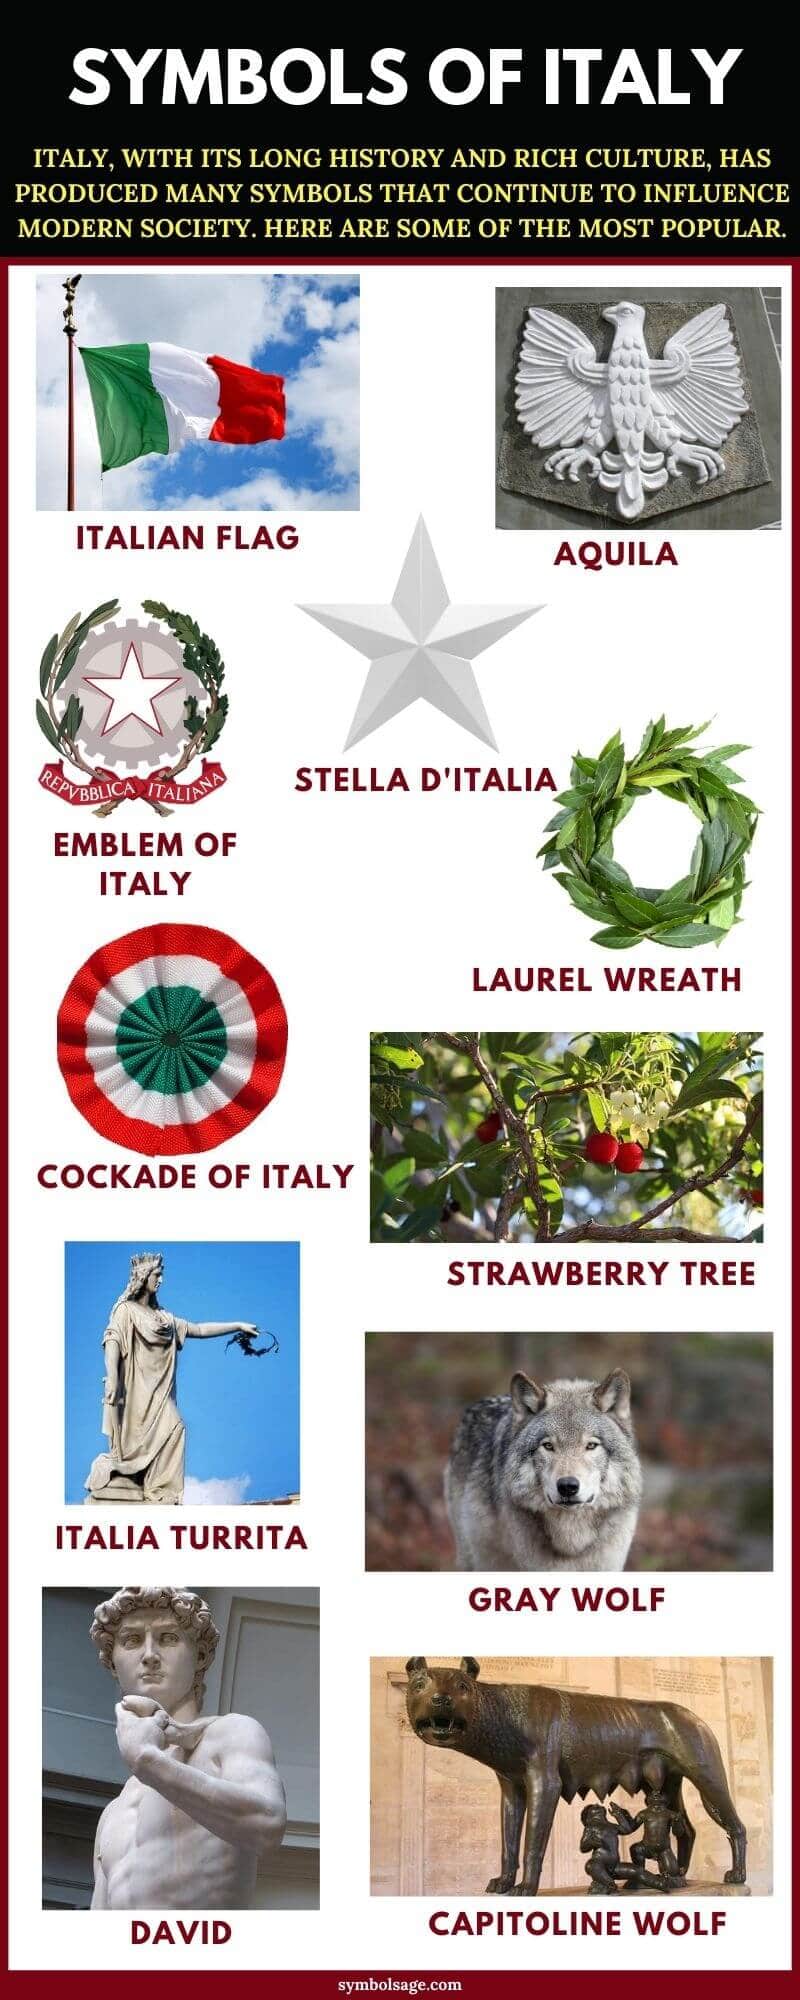 Symbols of Italy and Their Meaning - Symbol Sage